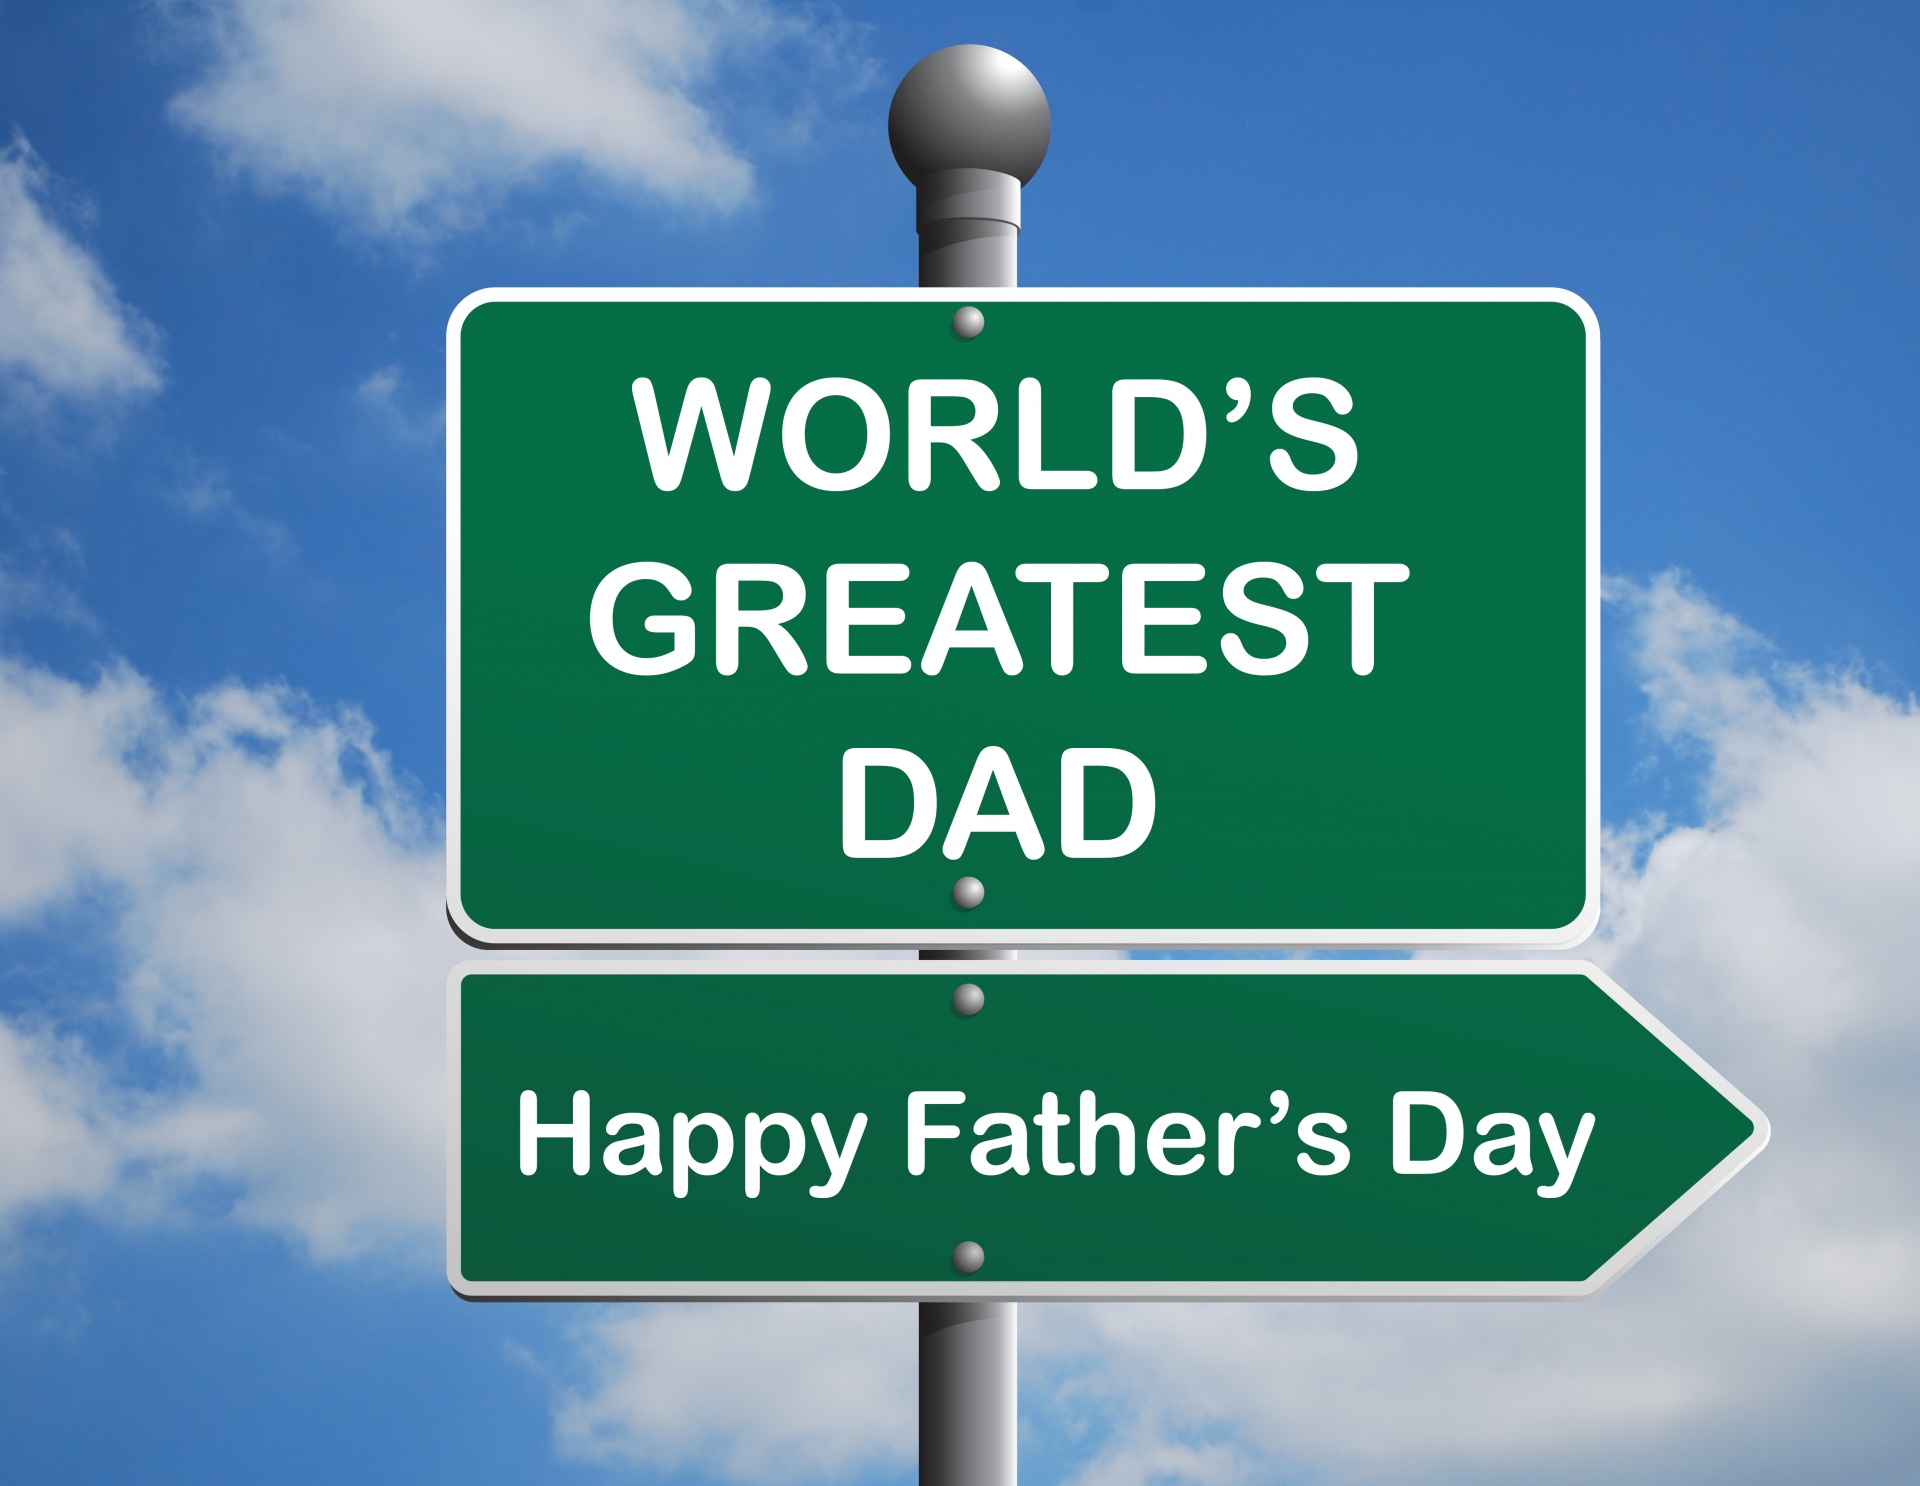 father day card sign - for some reason we don't have an alt tag here